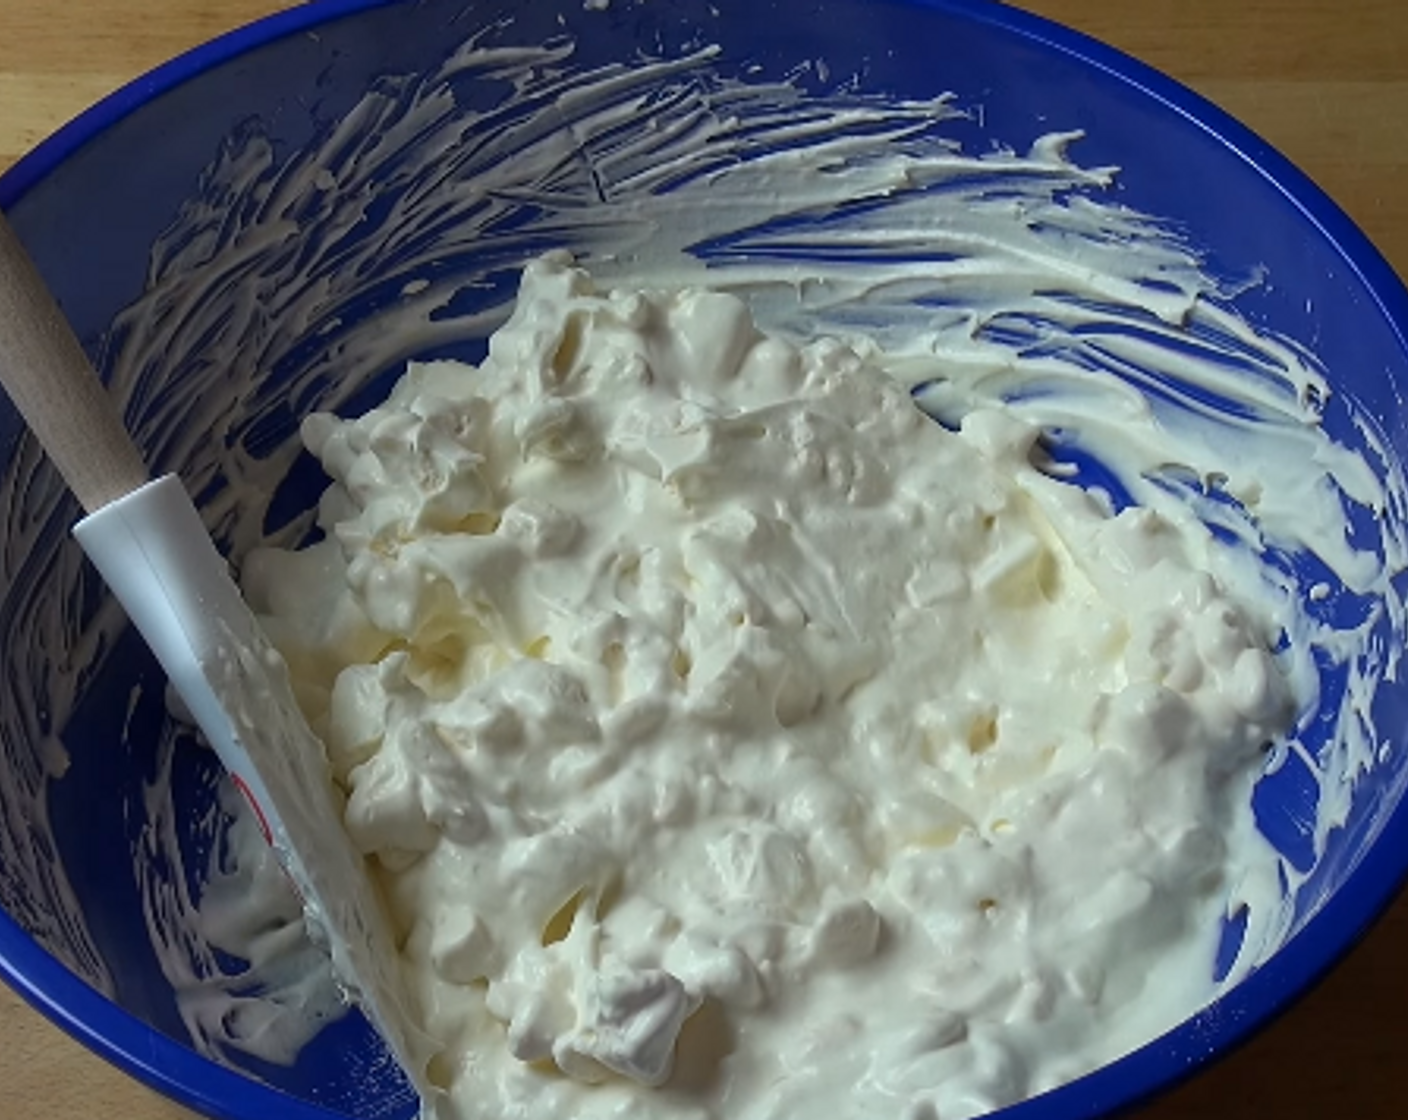 step 1 Whip the Whipping Cream (1 1/4 cups) until it forms soft peaks. Crush the Meringue Nests (8) into the cream. Using a spatula, fold the cream and meringue mixture together. Set aside.